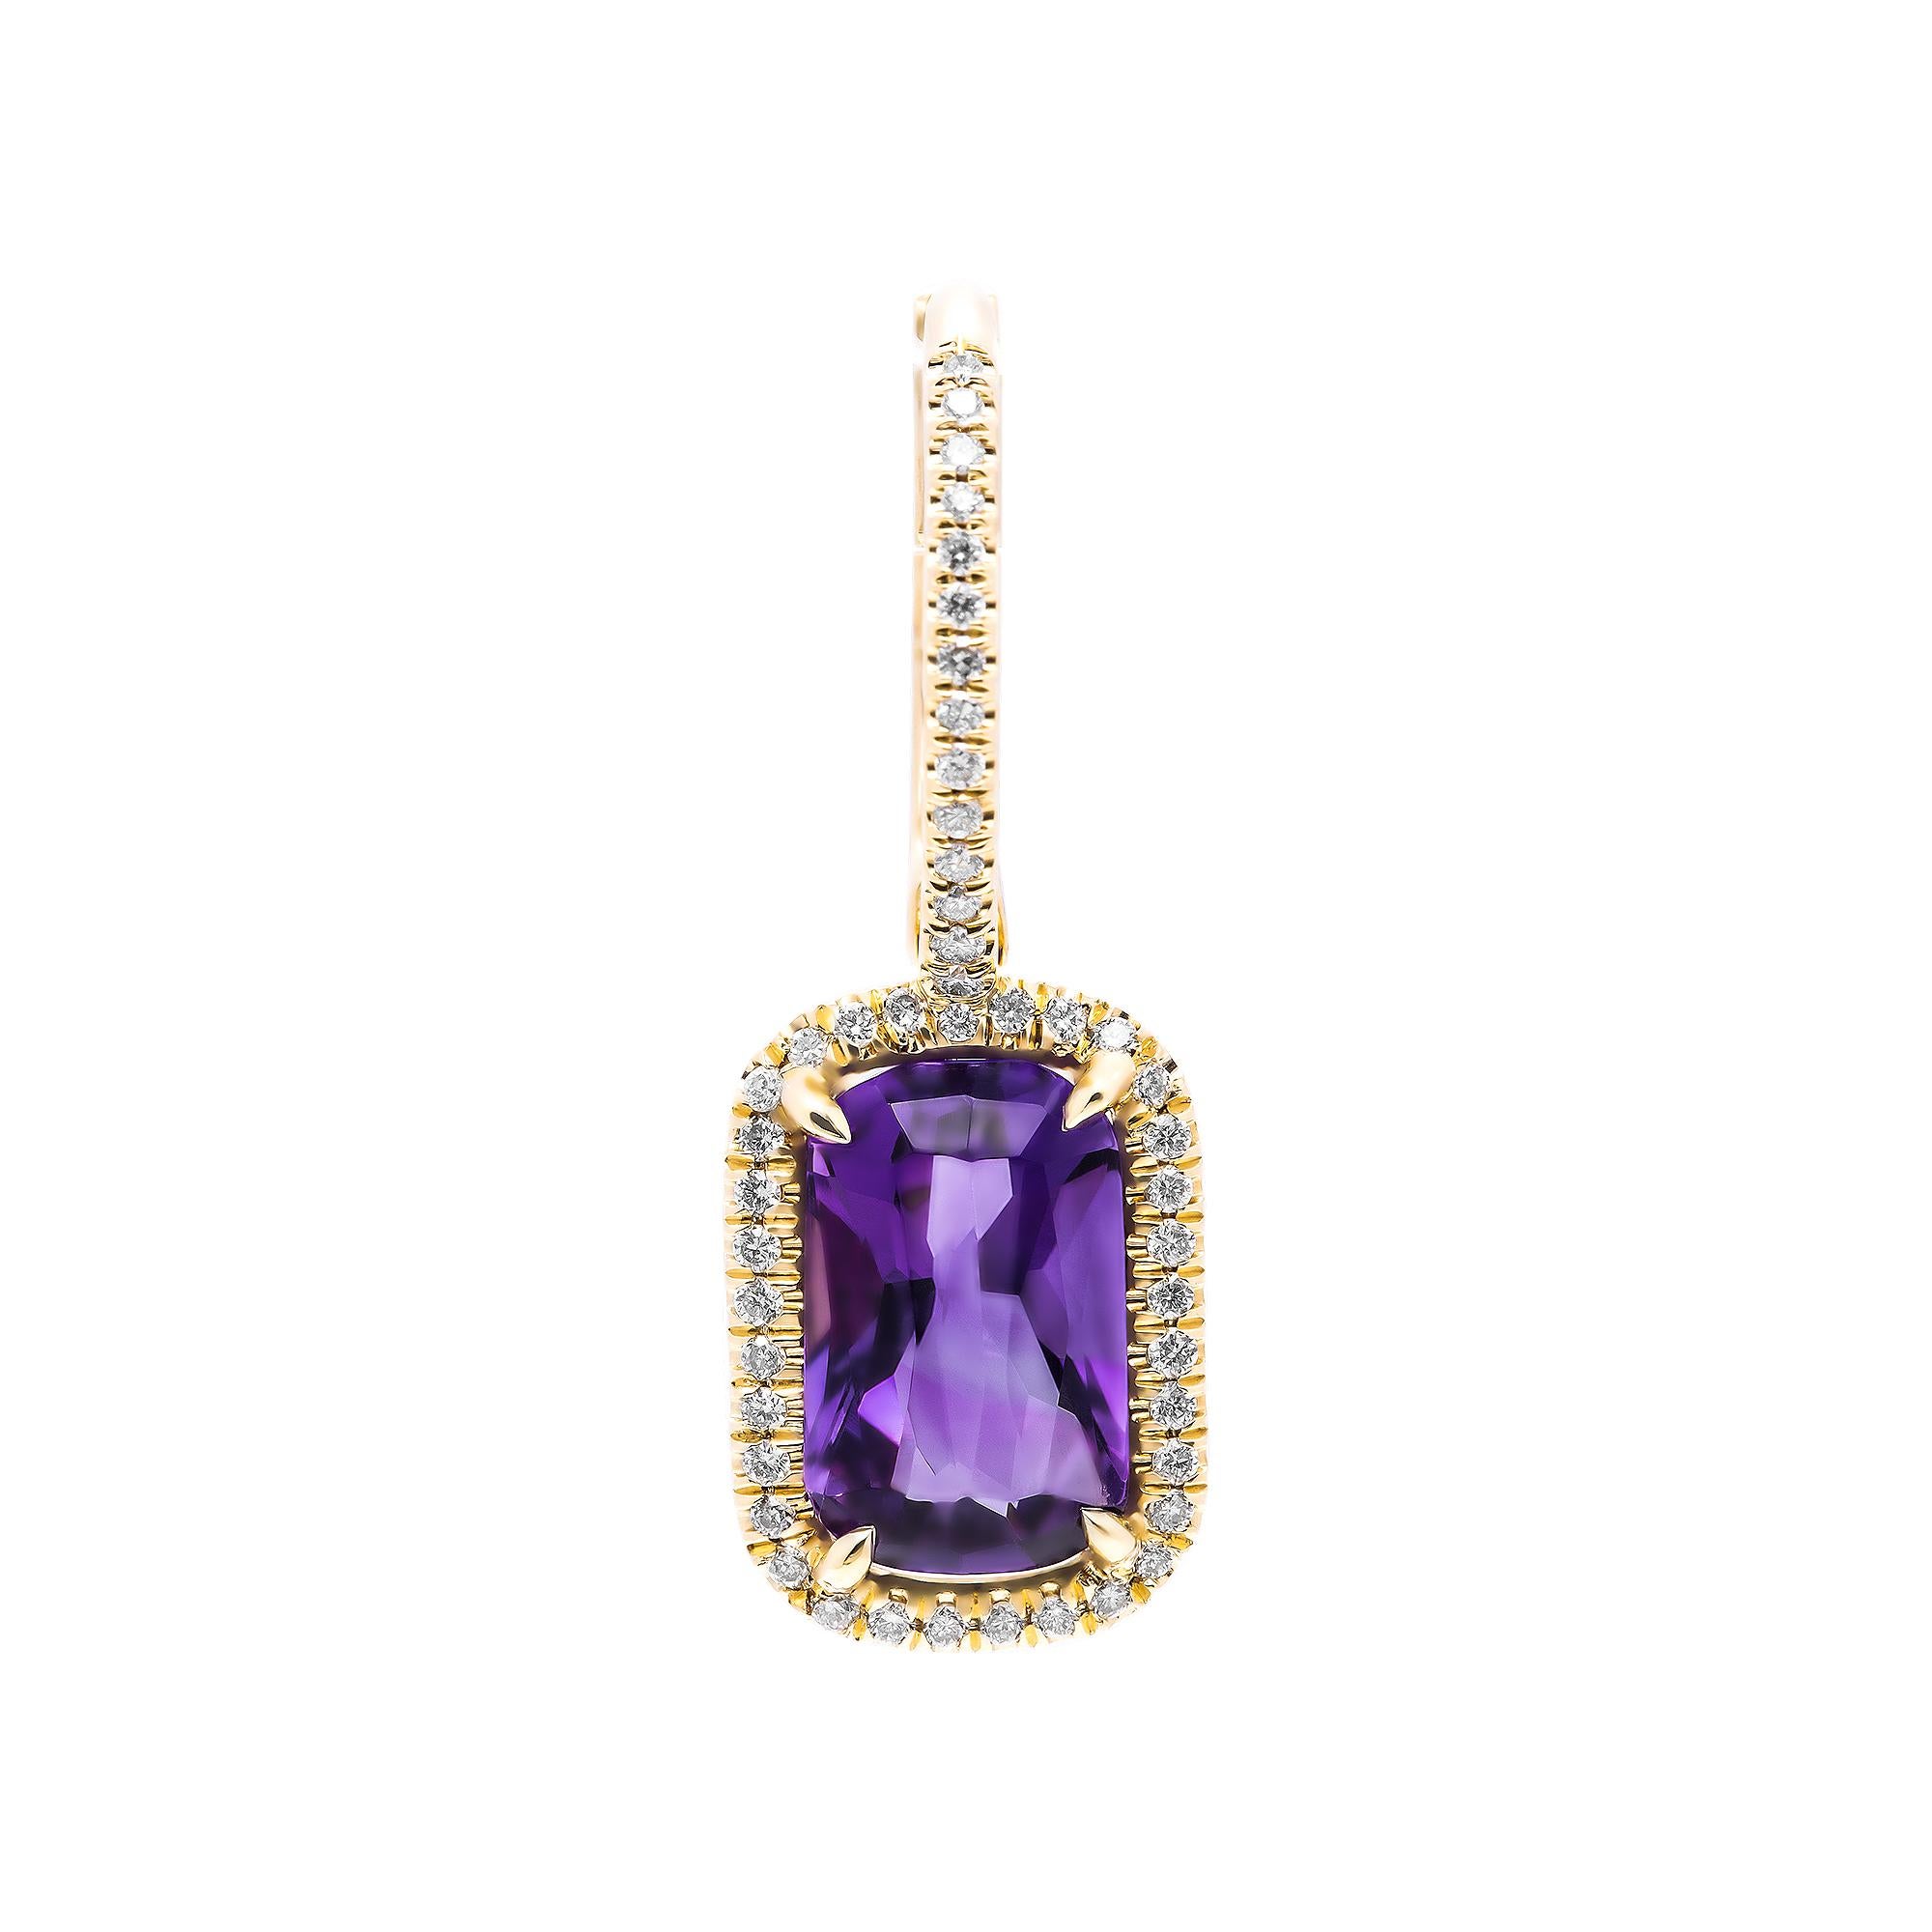 Unique and Elegant, one of a kind custom made Earrings that you won't see anywhere else!
Earring featuring 2 Amethyst Stones Step Cut 2 carat each (each earring) totaling 0.85ct on the pave on the lever backs and halo around each stone (full cut